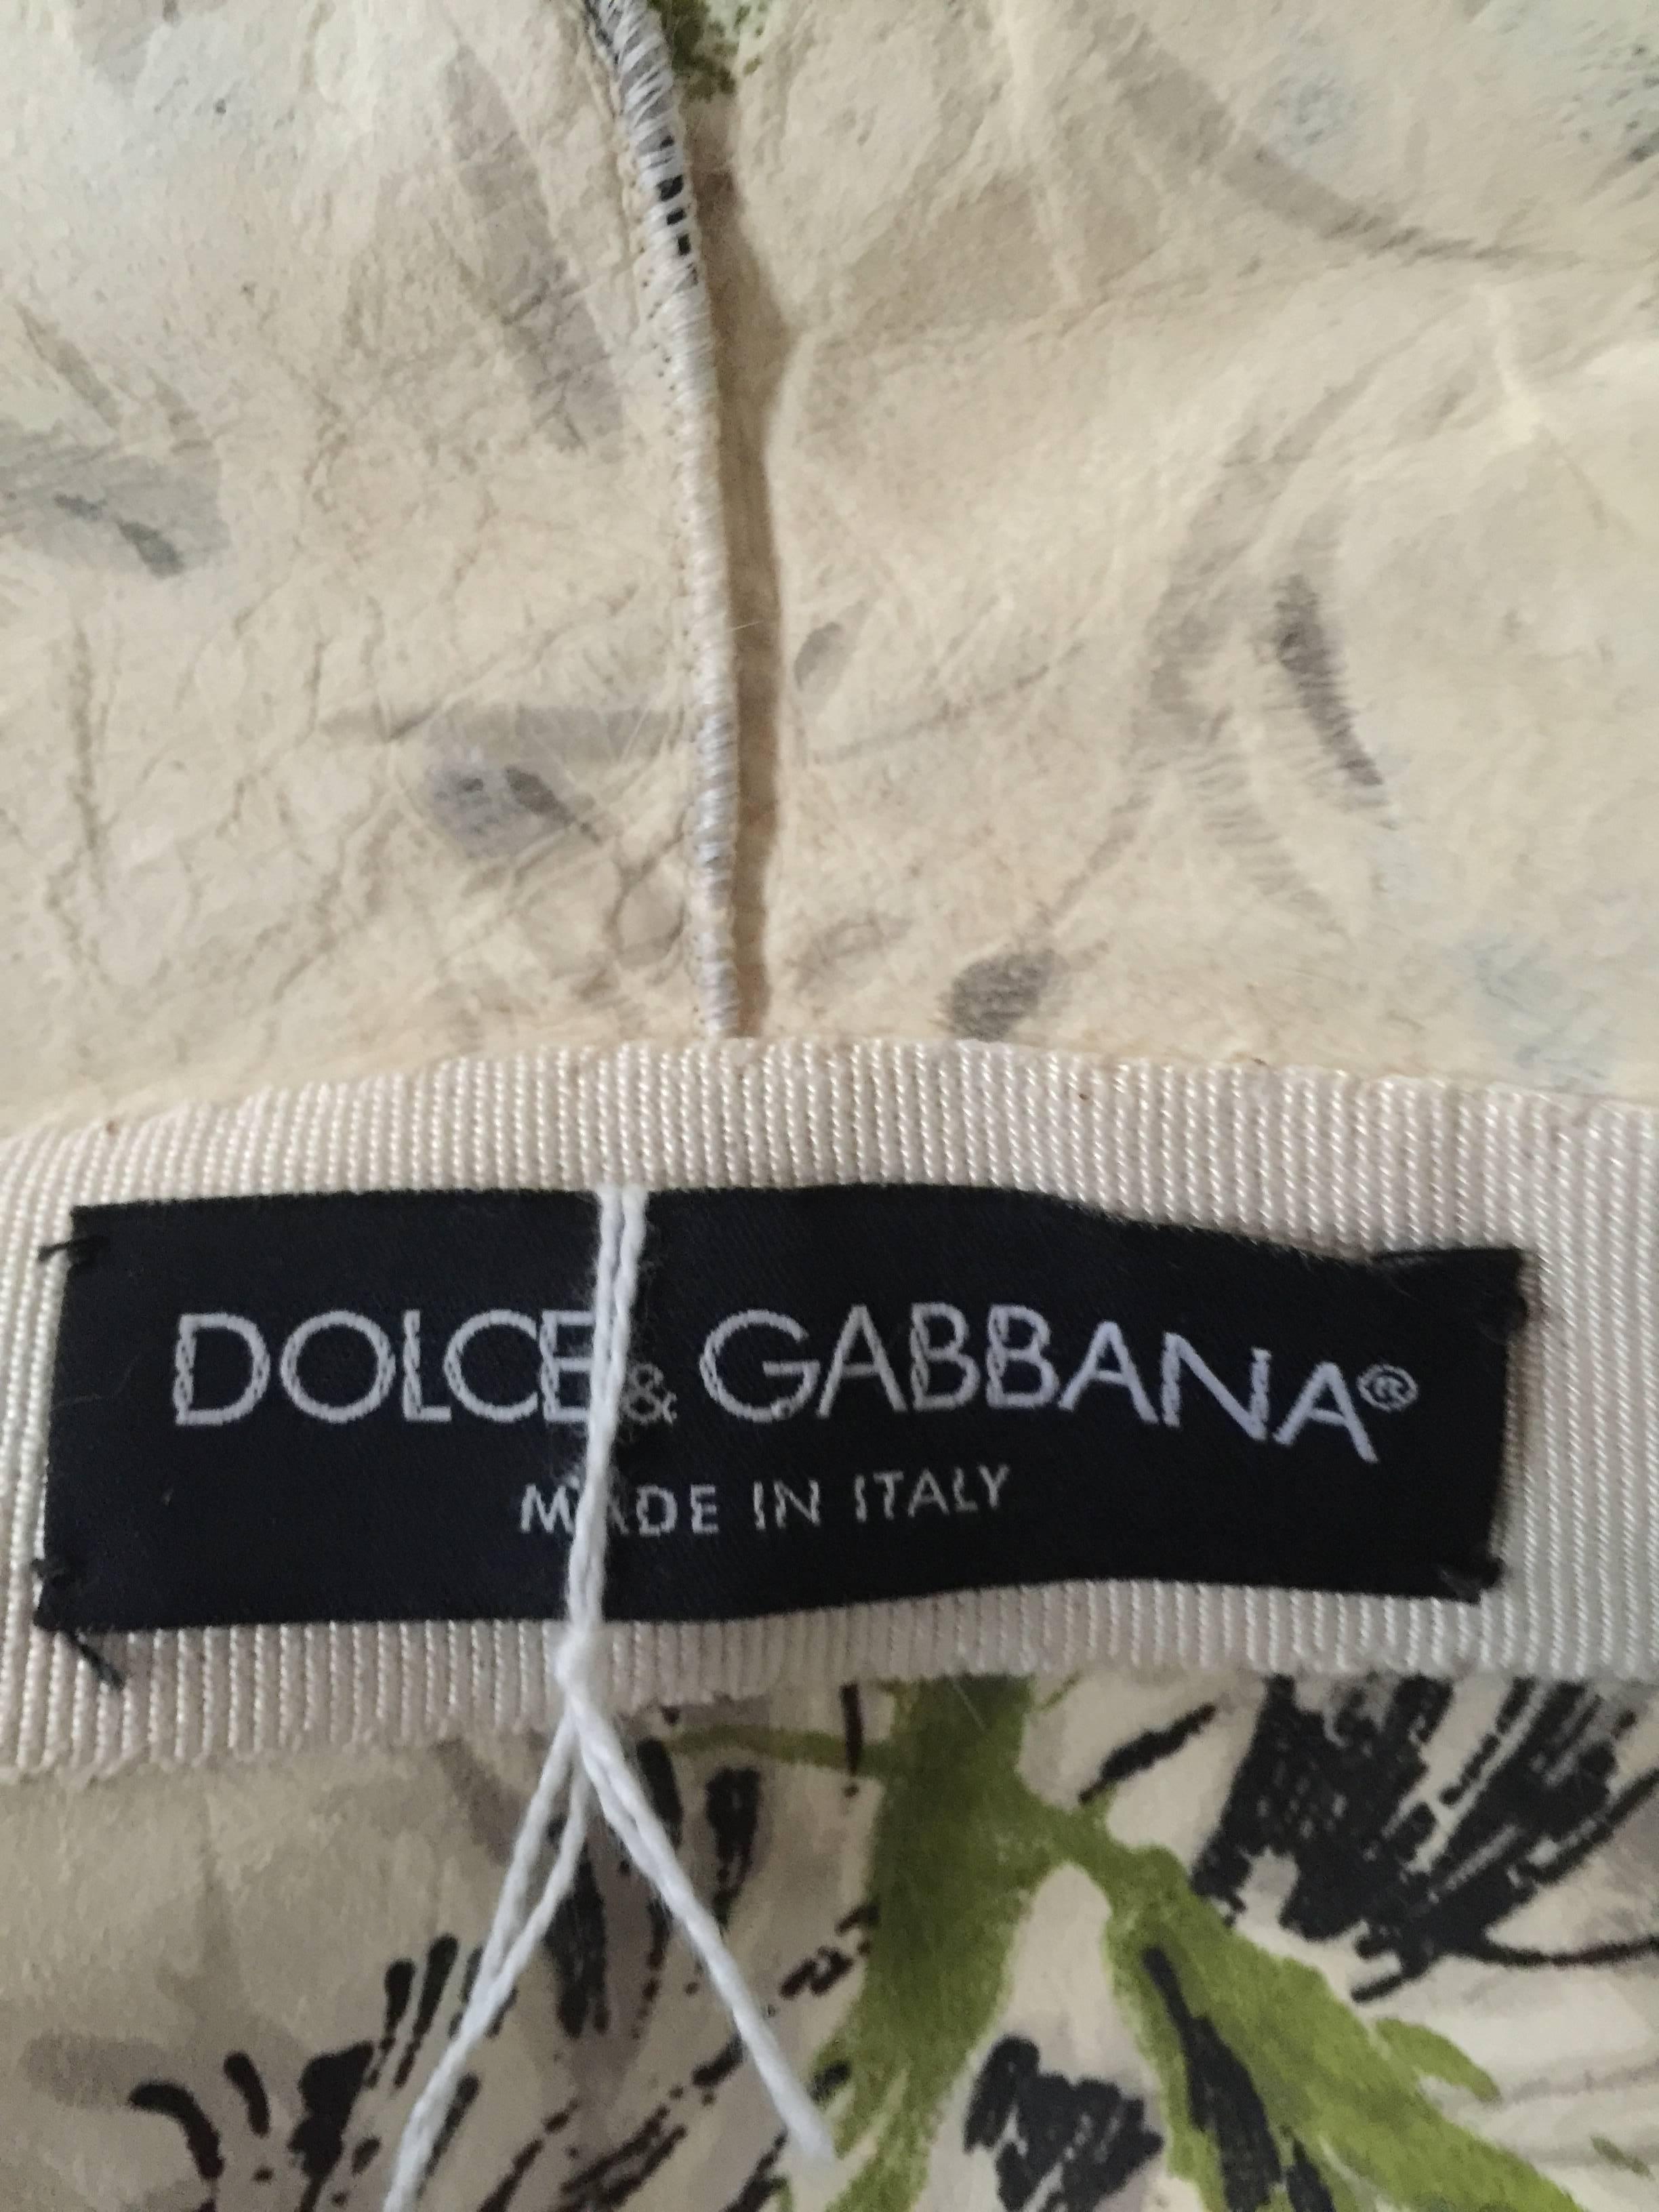 Dolce&Gabbana Fur and Floral Leather Painted Jacket S. 5